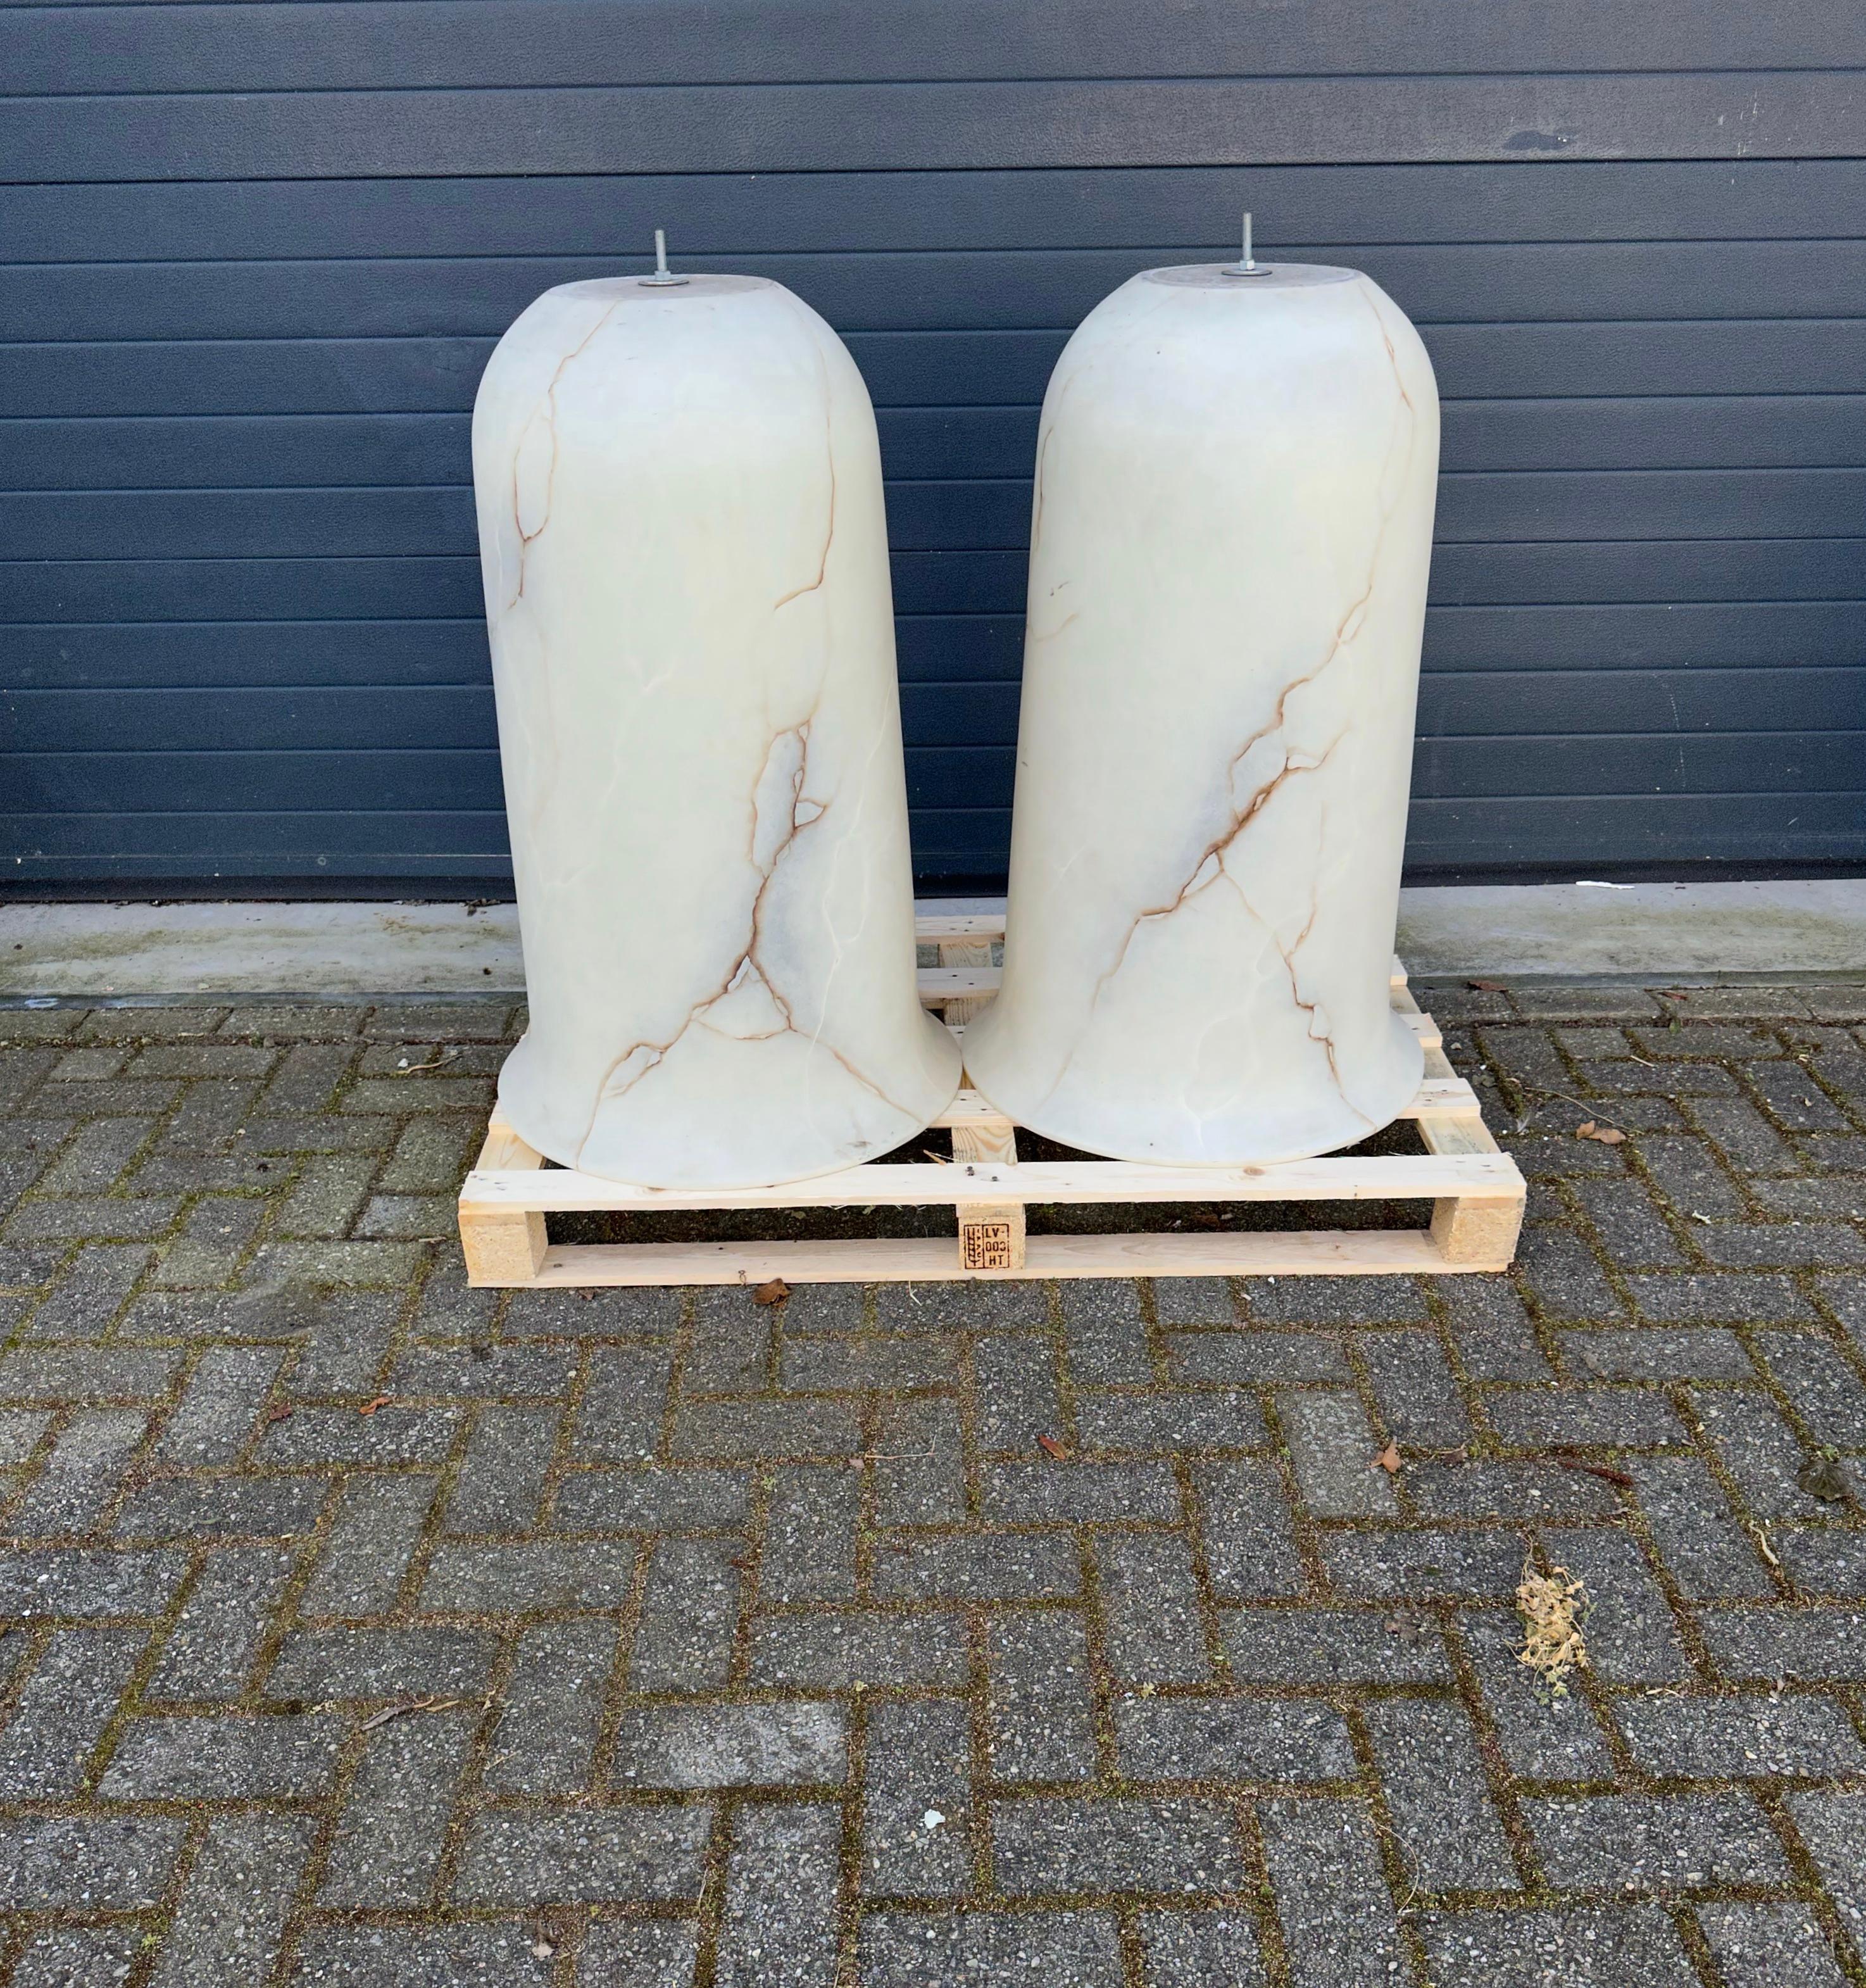 King Size and Unique Pair of White Alabaster Like Pendant Lights with Veins For Sale 3